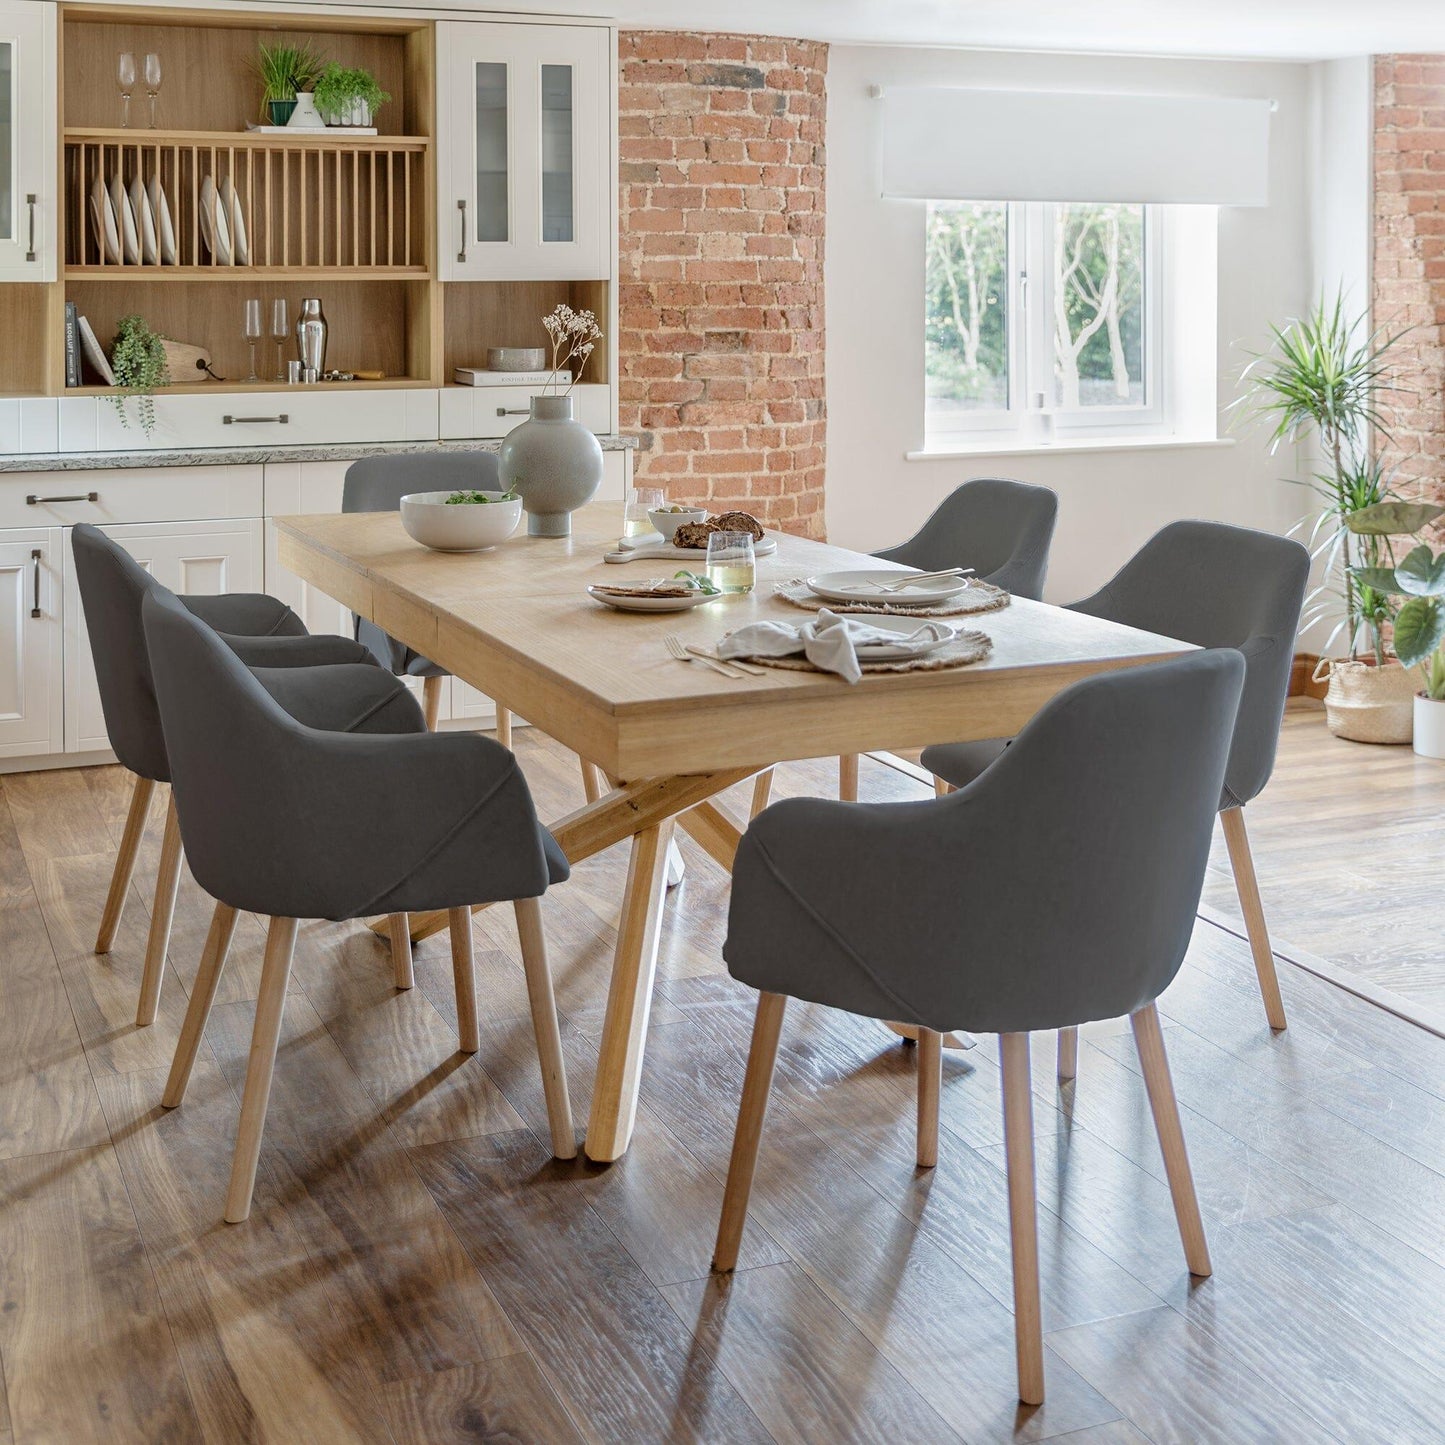 Amelia Whitewash Extendable Dining Table Set - 6 Seater - Freya Grey Carver Chairs With Oak Legs - Laura James